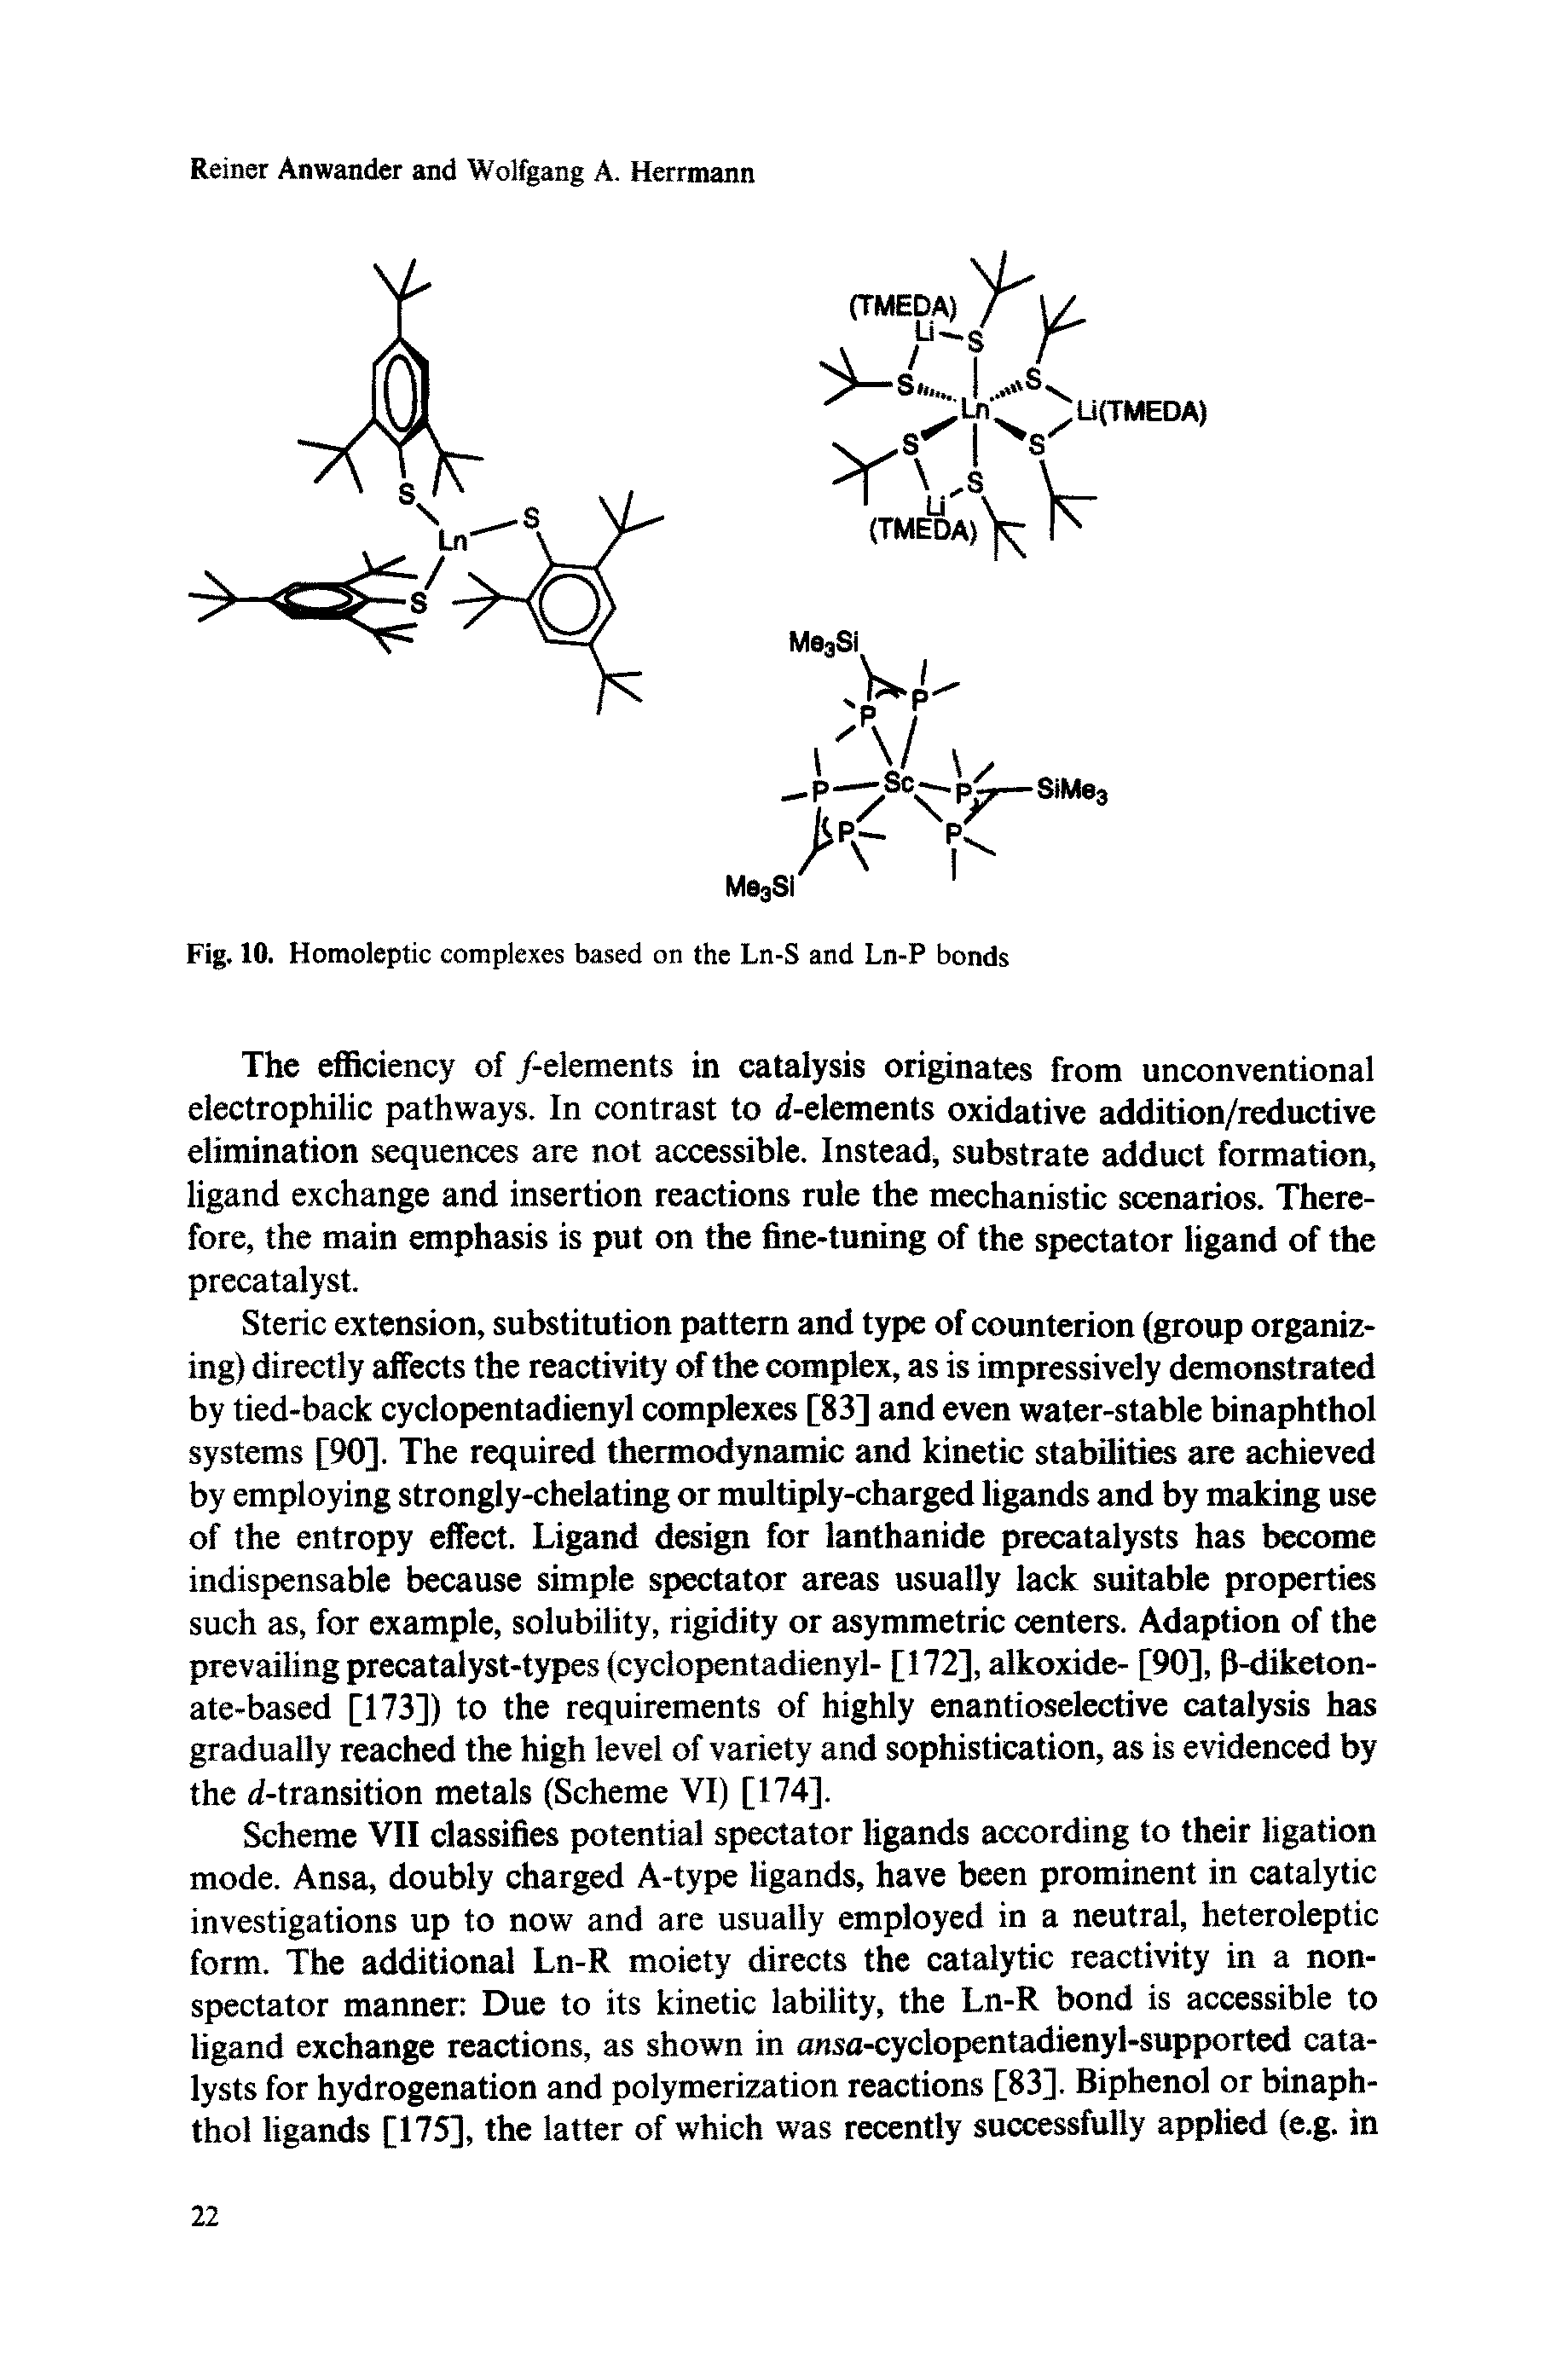 Scheme VII classifies potential spectator ligands according to their ligation mode. Ansa, doubly charged A-type ligands, have been prominent in catalytic investigations up to now and are usually employed in a neutral, heteroleptic form. The additional Ln-R moiety directs the catalytic reactivity in a nonspectator manner Due to its kinetic lability, the Ln-R bond is accessible to ligand exchange reactions, as shown in ansa-cyclopentadienyl-supported catalysts for hydrogenation and polymerization reactions [83]. Biphenol or binaphthol ligands [175], the latter of which was recently successfully applied (e.g. in...